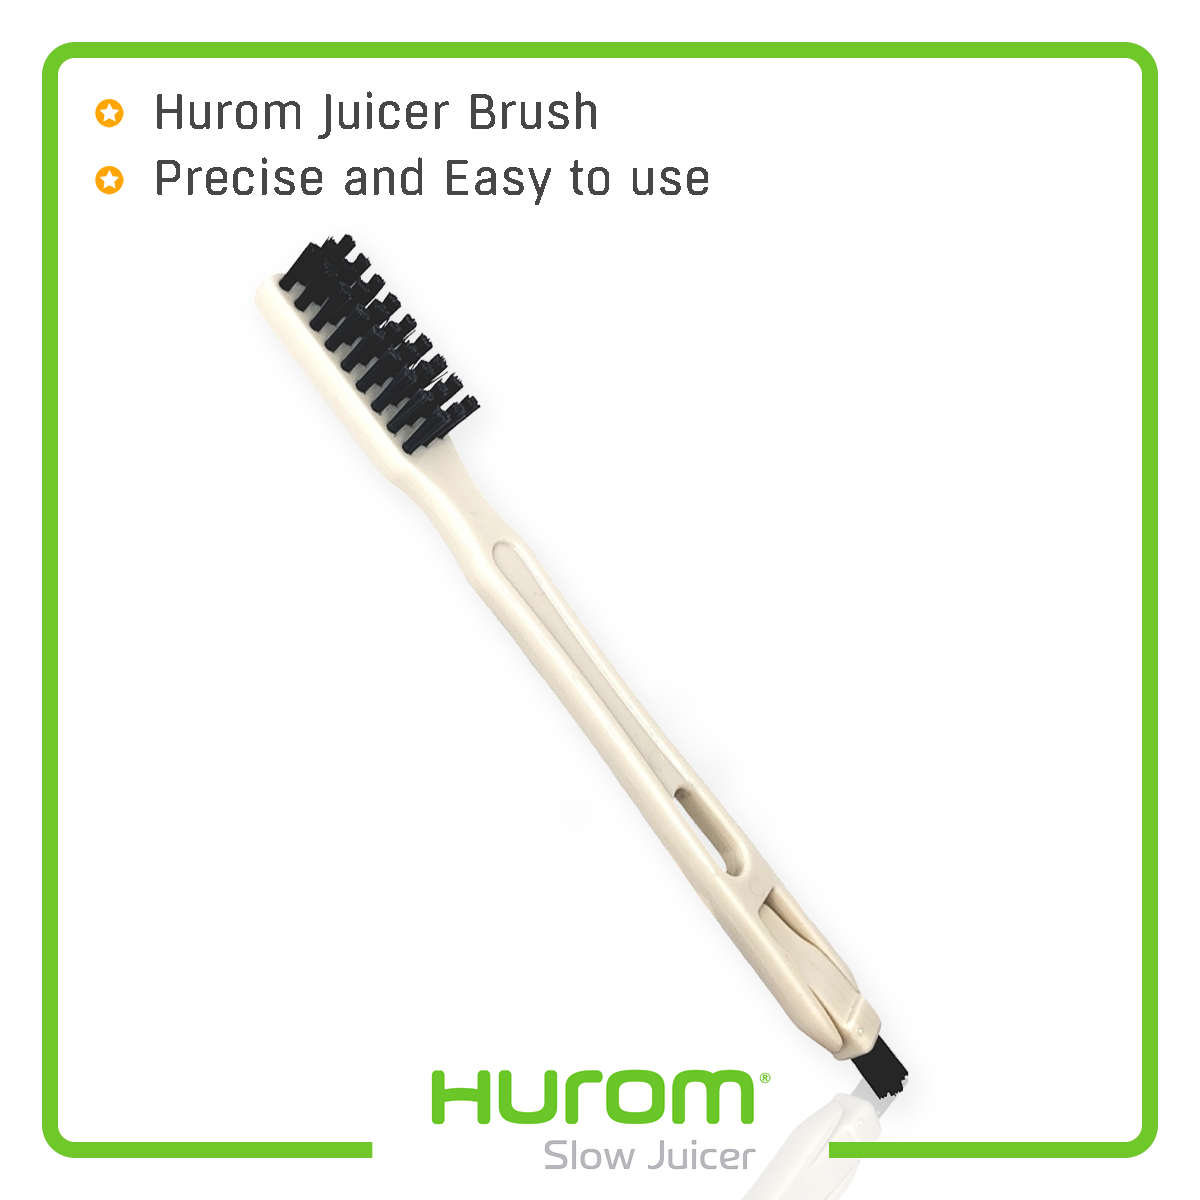 Hurom 2 Sided Cleaning & Washing Brush